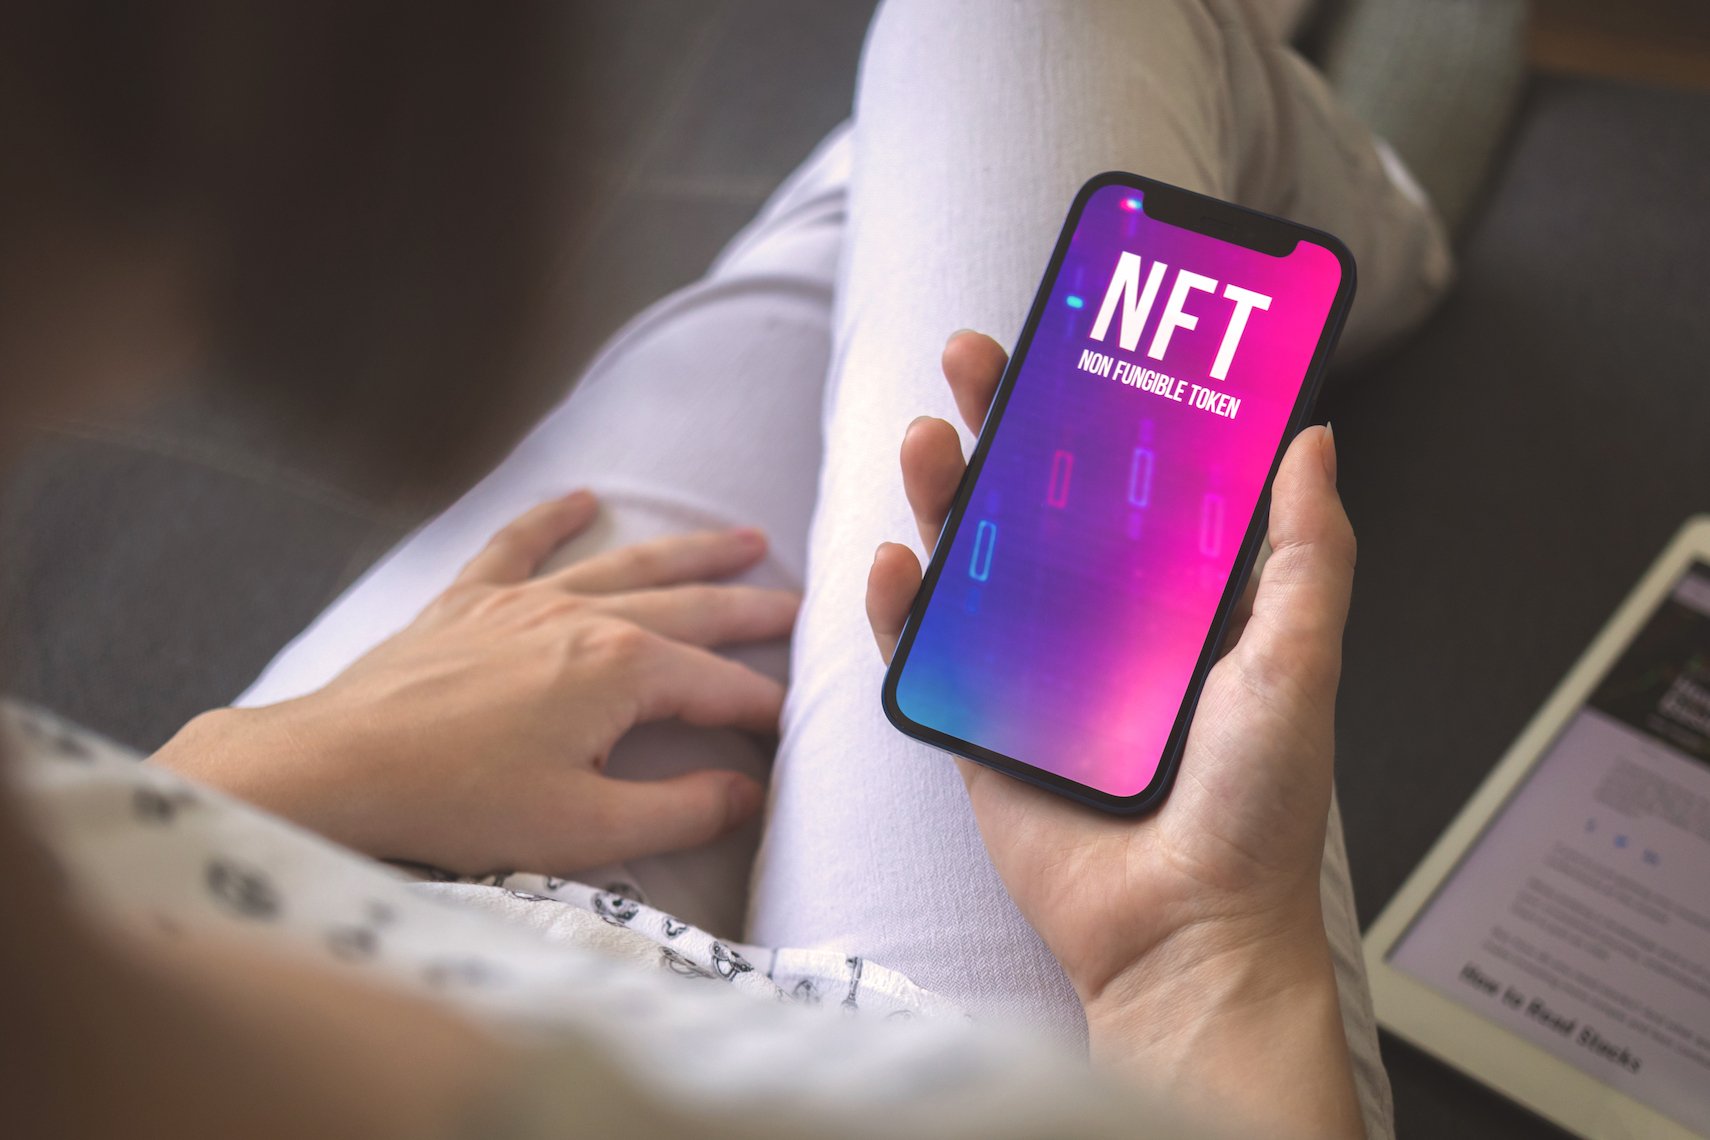 NFTS for Dummies are Non-fungible token and hot right now